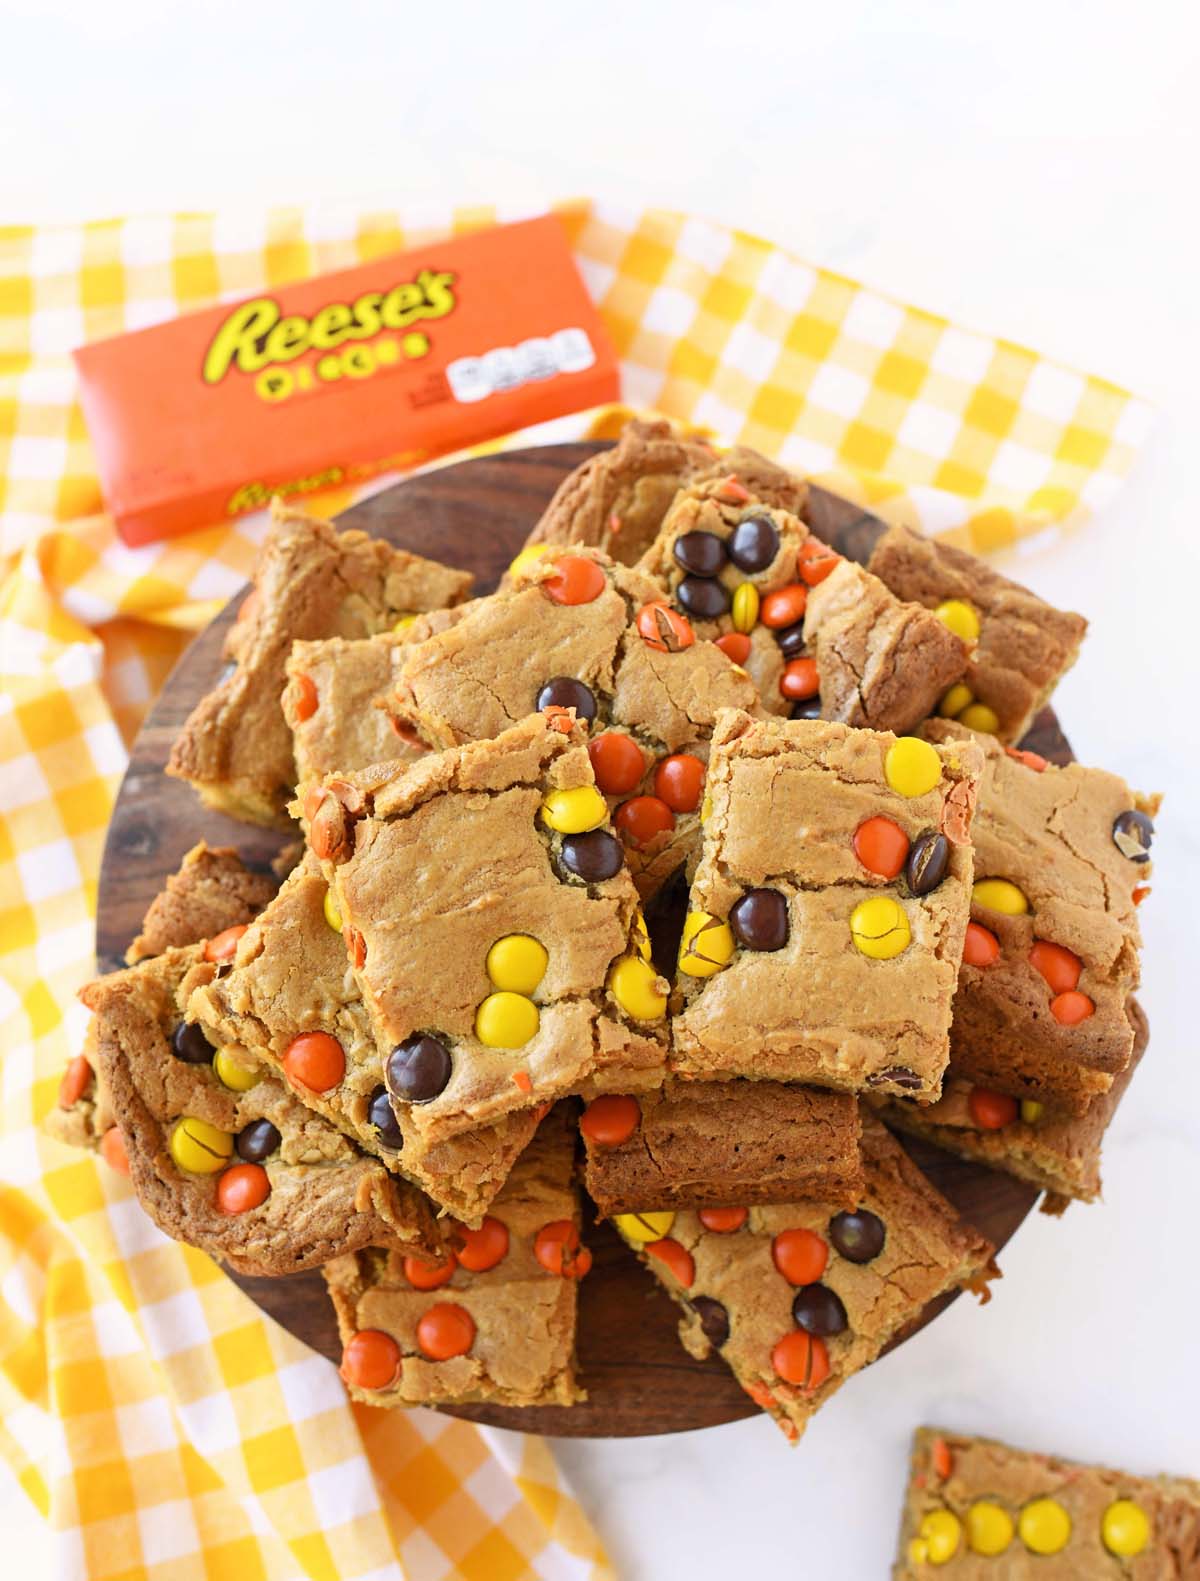 Reese's brownies stacked on a wooden platter with a yellow checkered napkin.